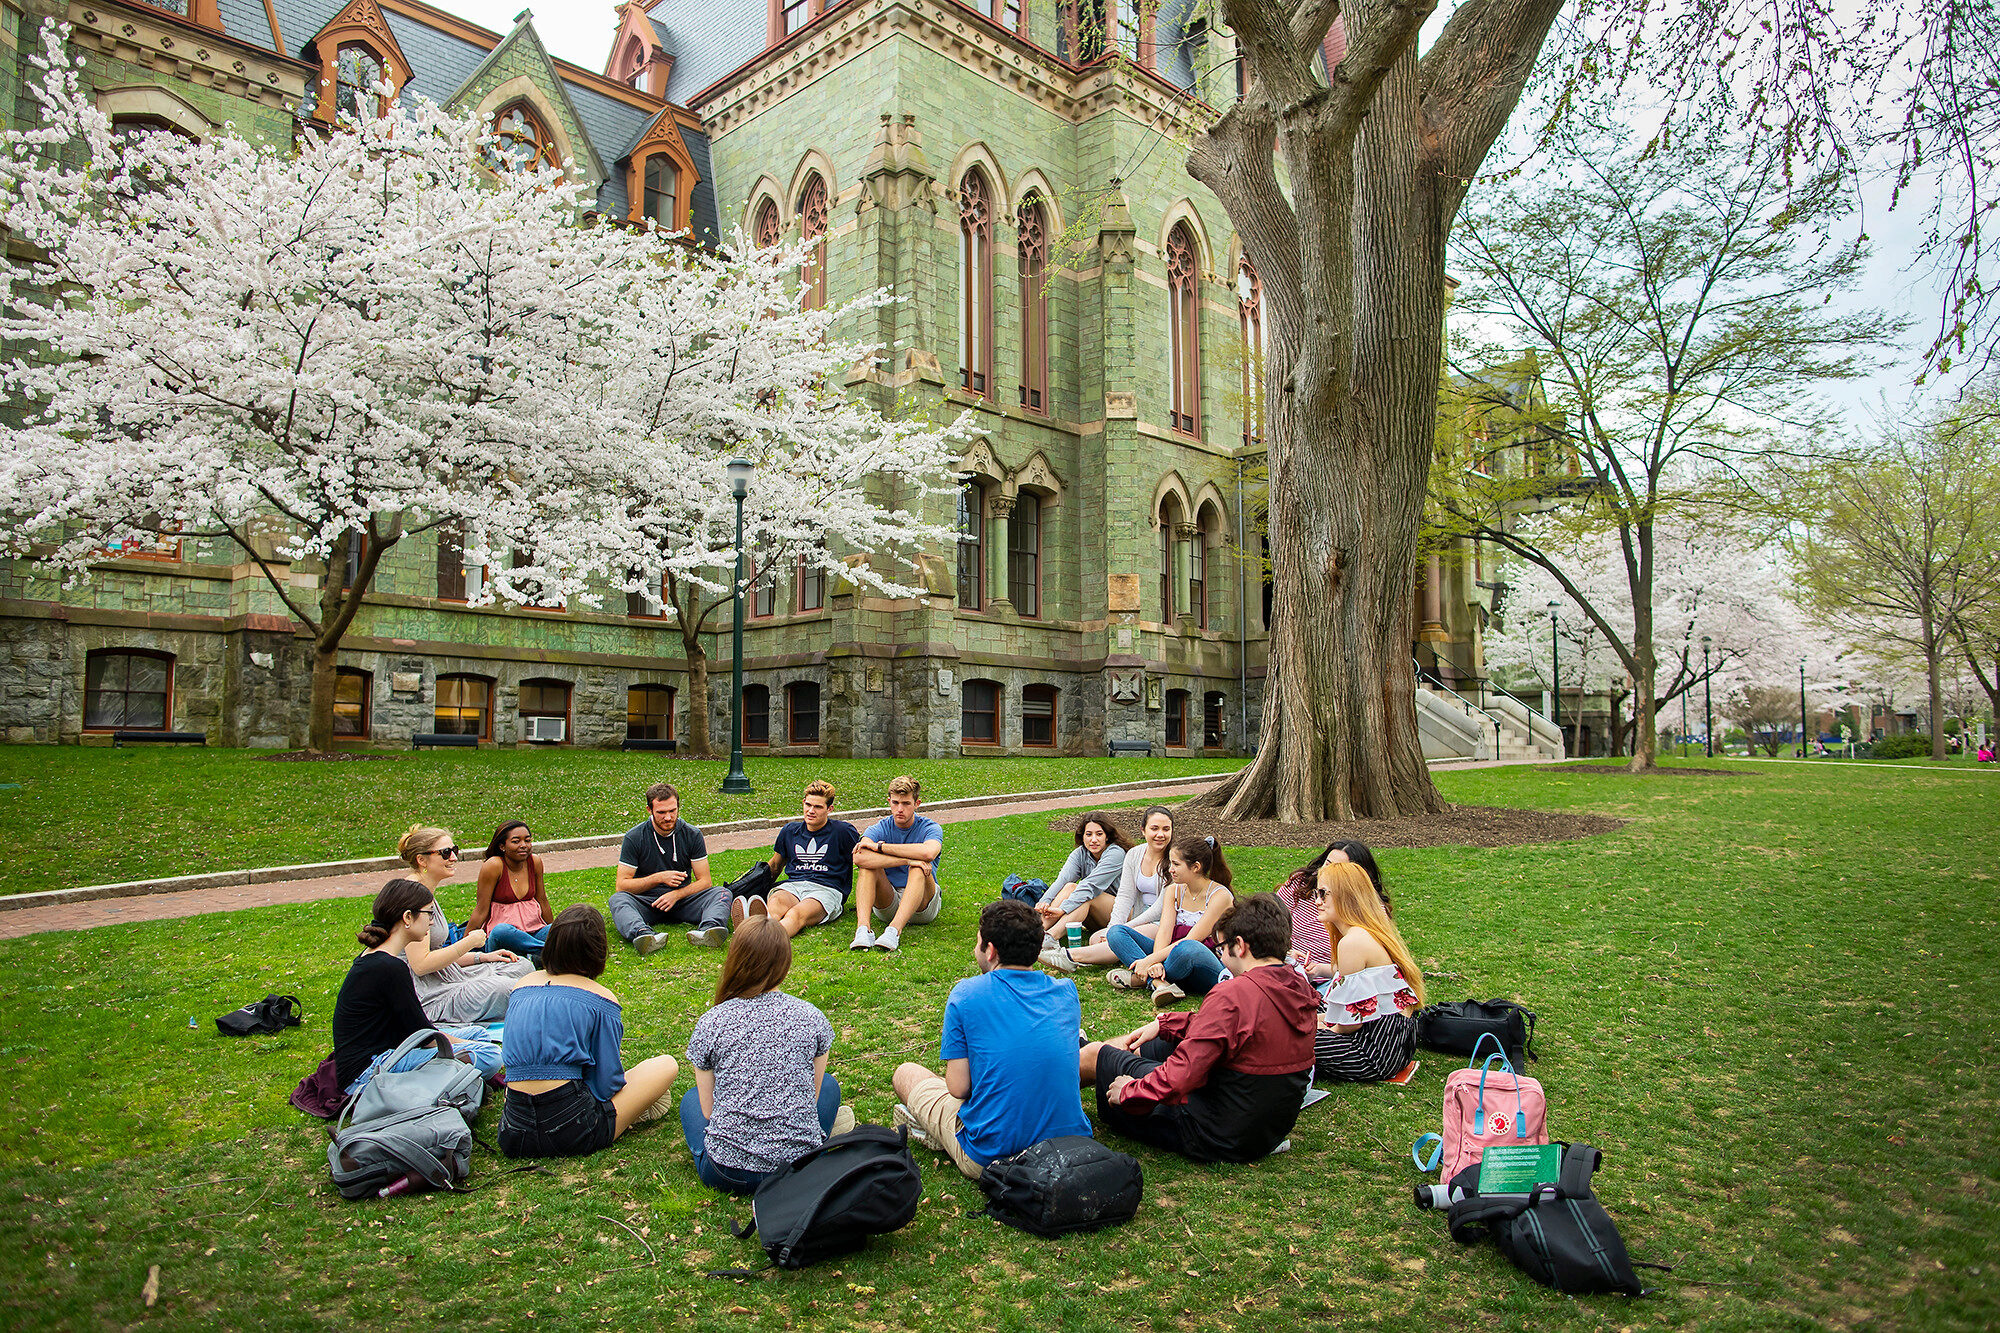 Students gathered in a circle chatting on the grass on campus during the spring time with cherry blossoms blooming in the background